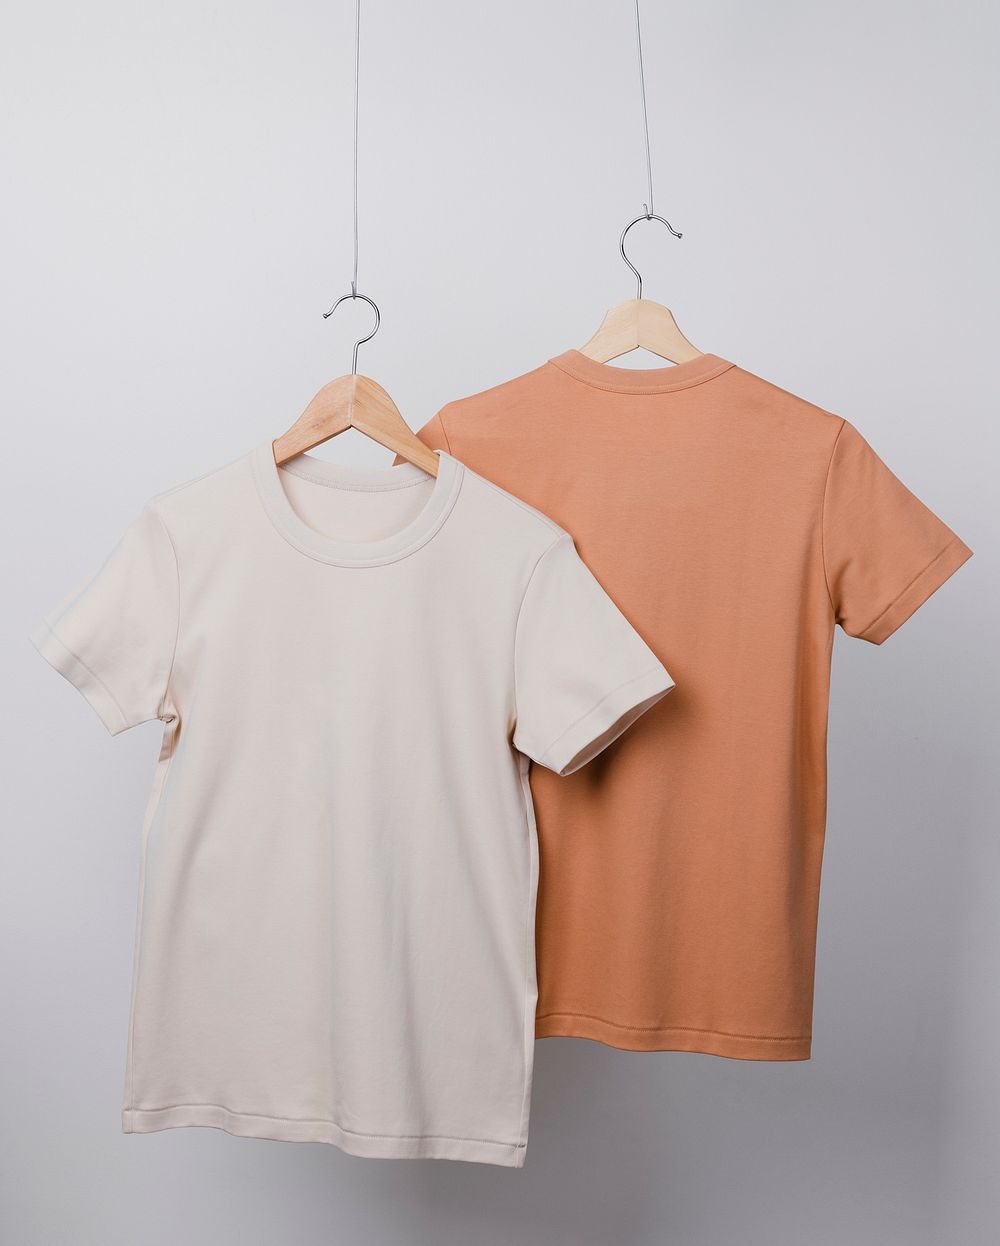 Cream t-shirt, simple apparel in unisex design with blank space